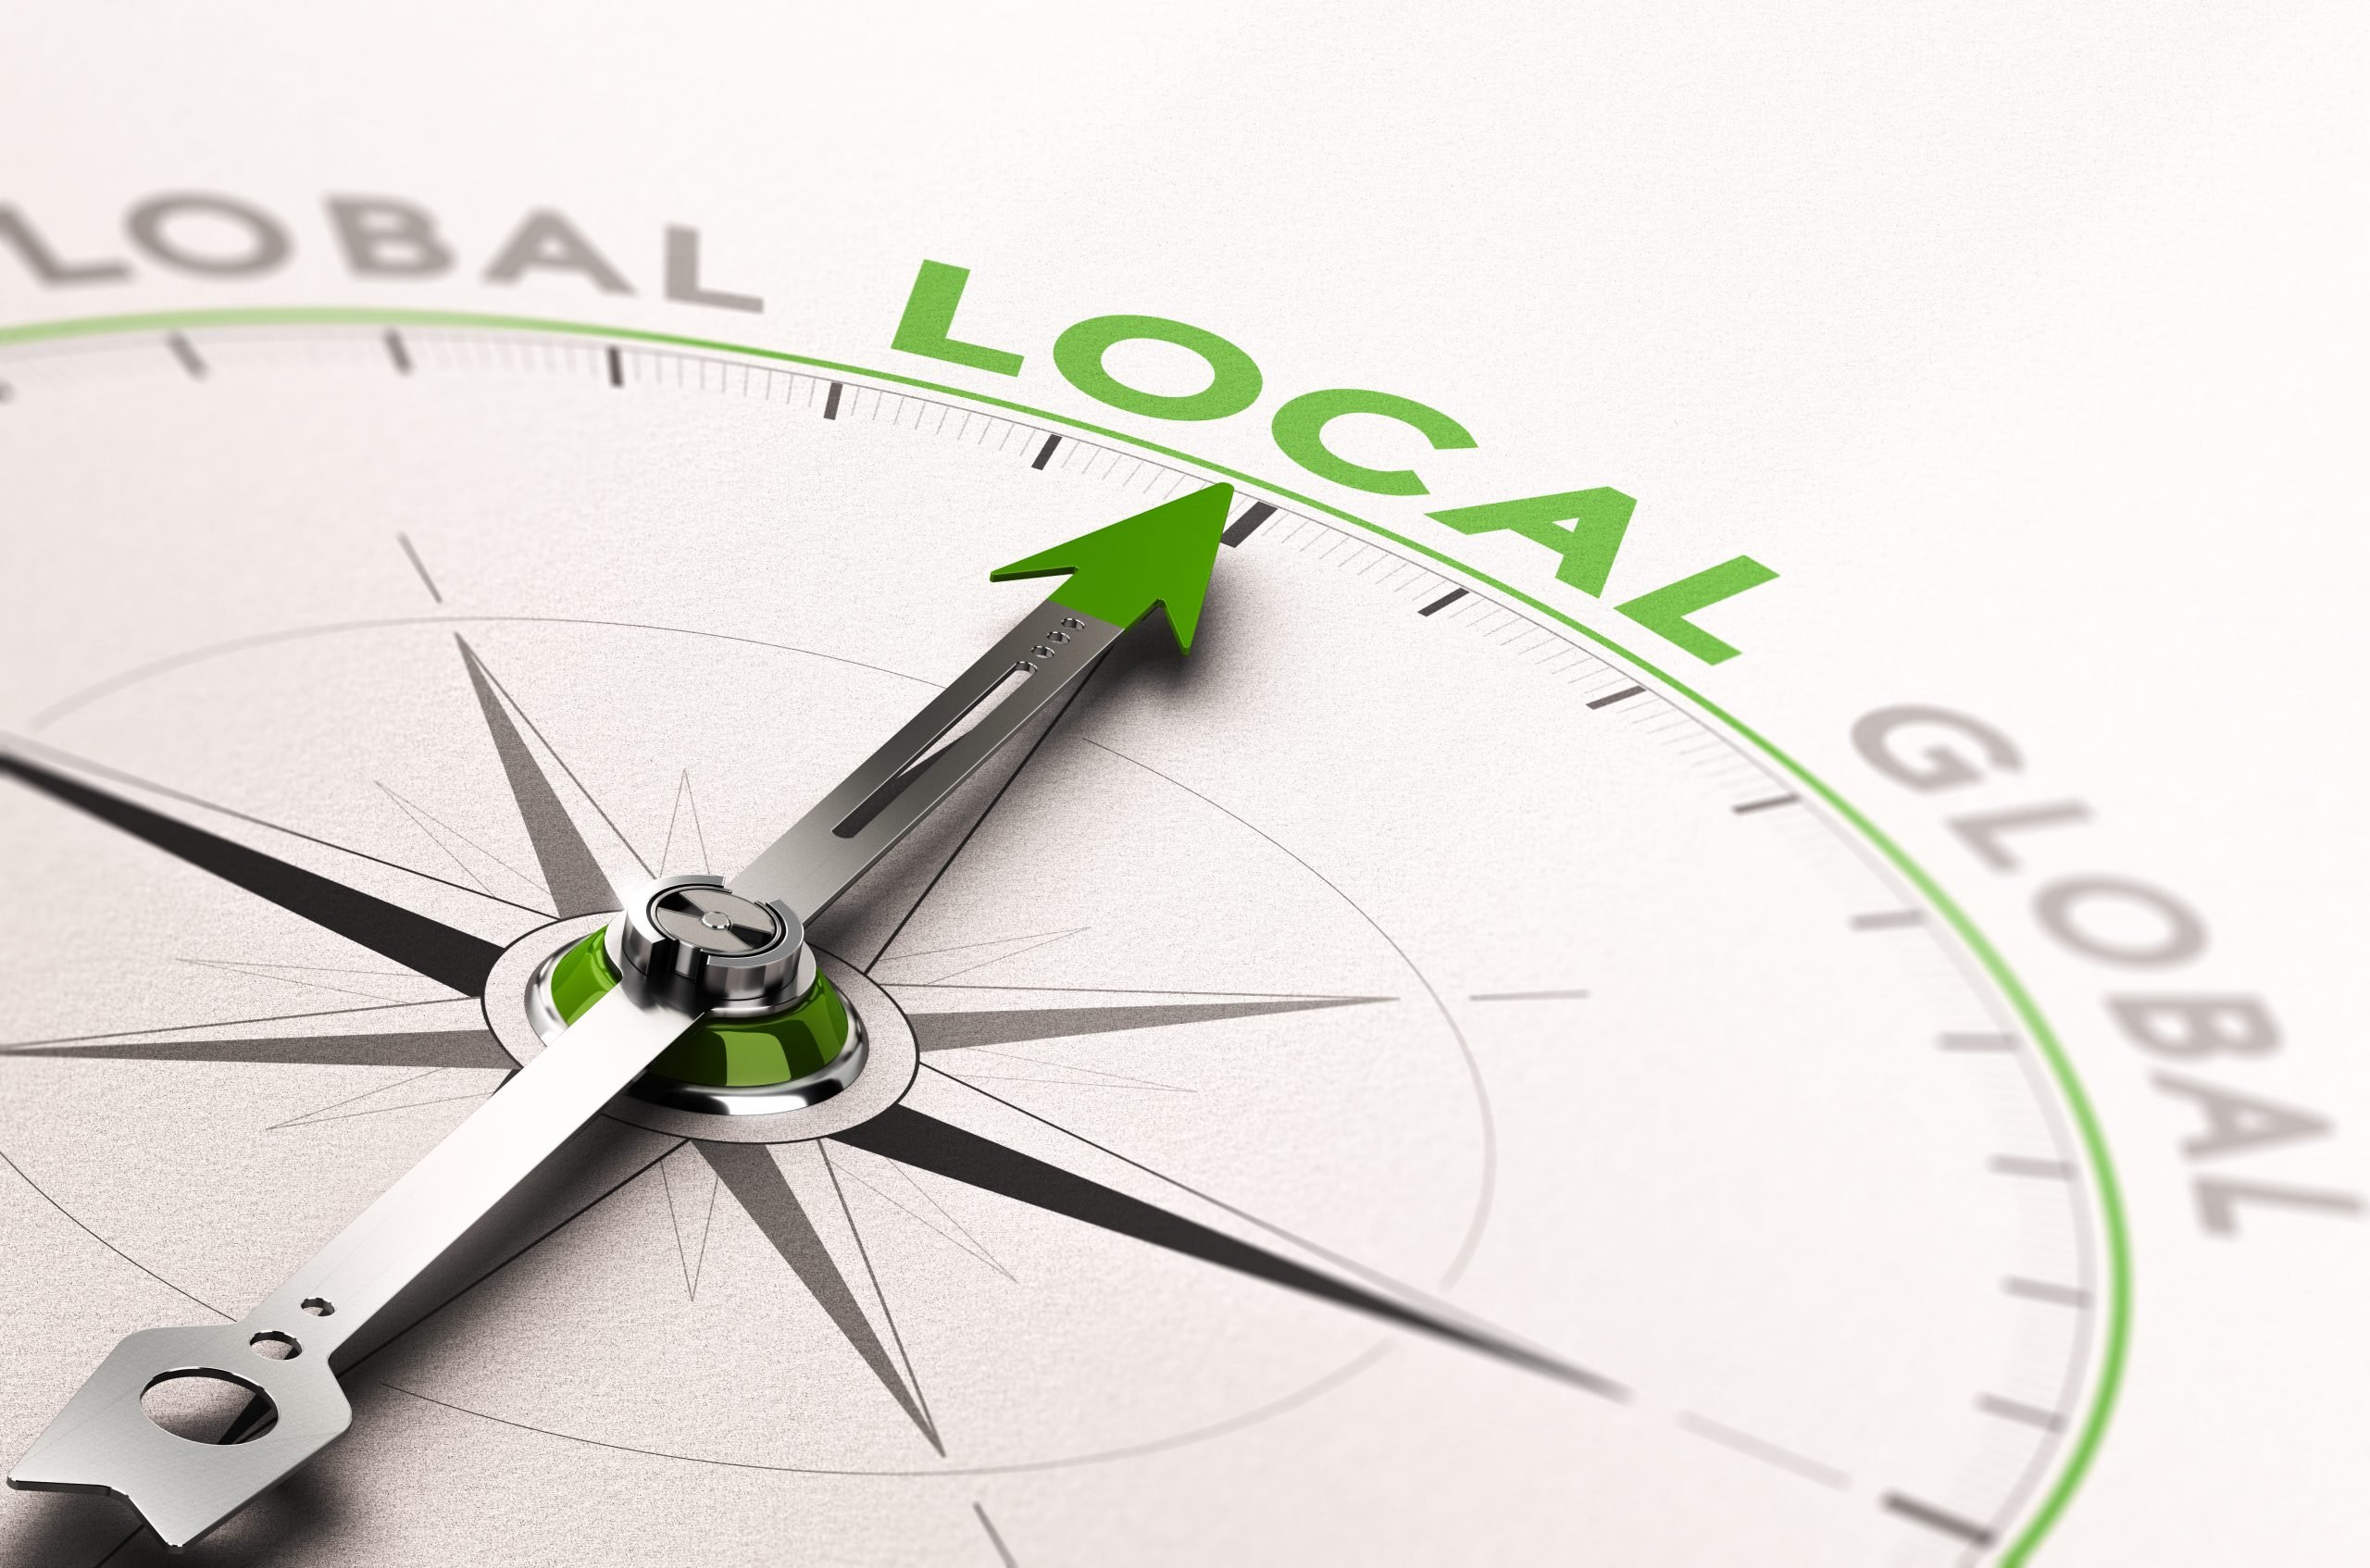 3D illustration of a compass with needle pointing the word local business. Concept of an ethical economy